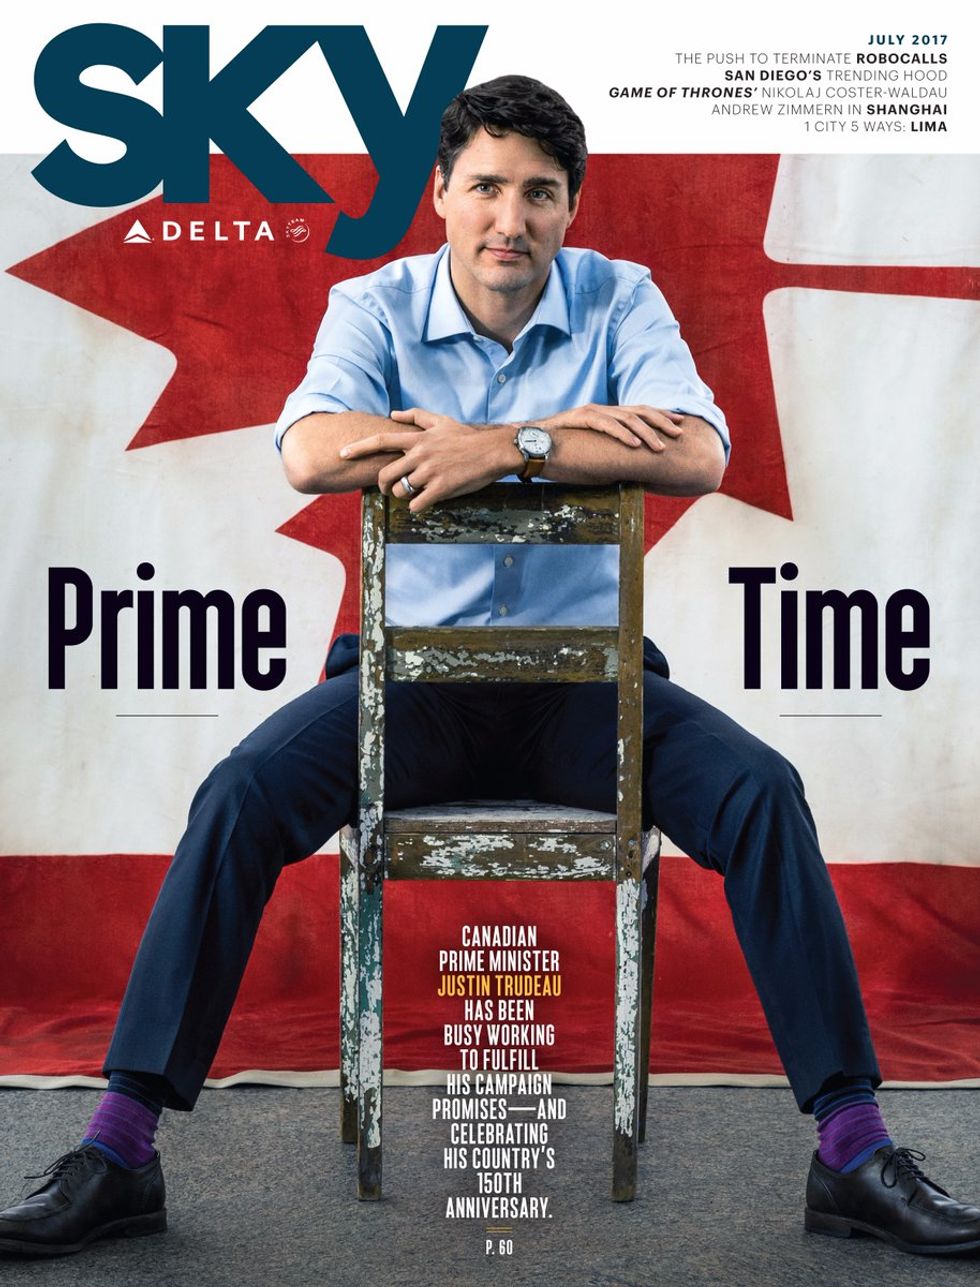 Oh Look At Me, I'm 'Marie Claire,' Ogling Justin Trudeau's Crotch Like A Common Wonkette